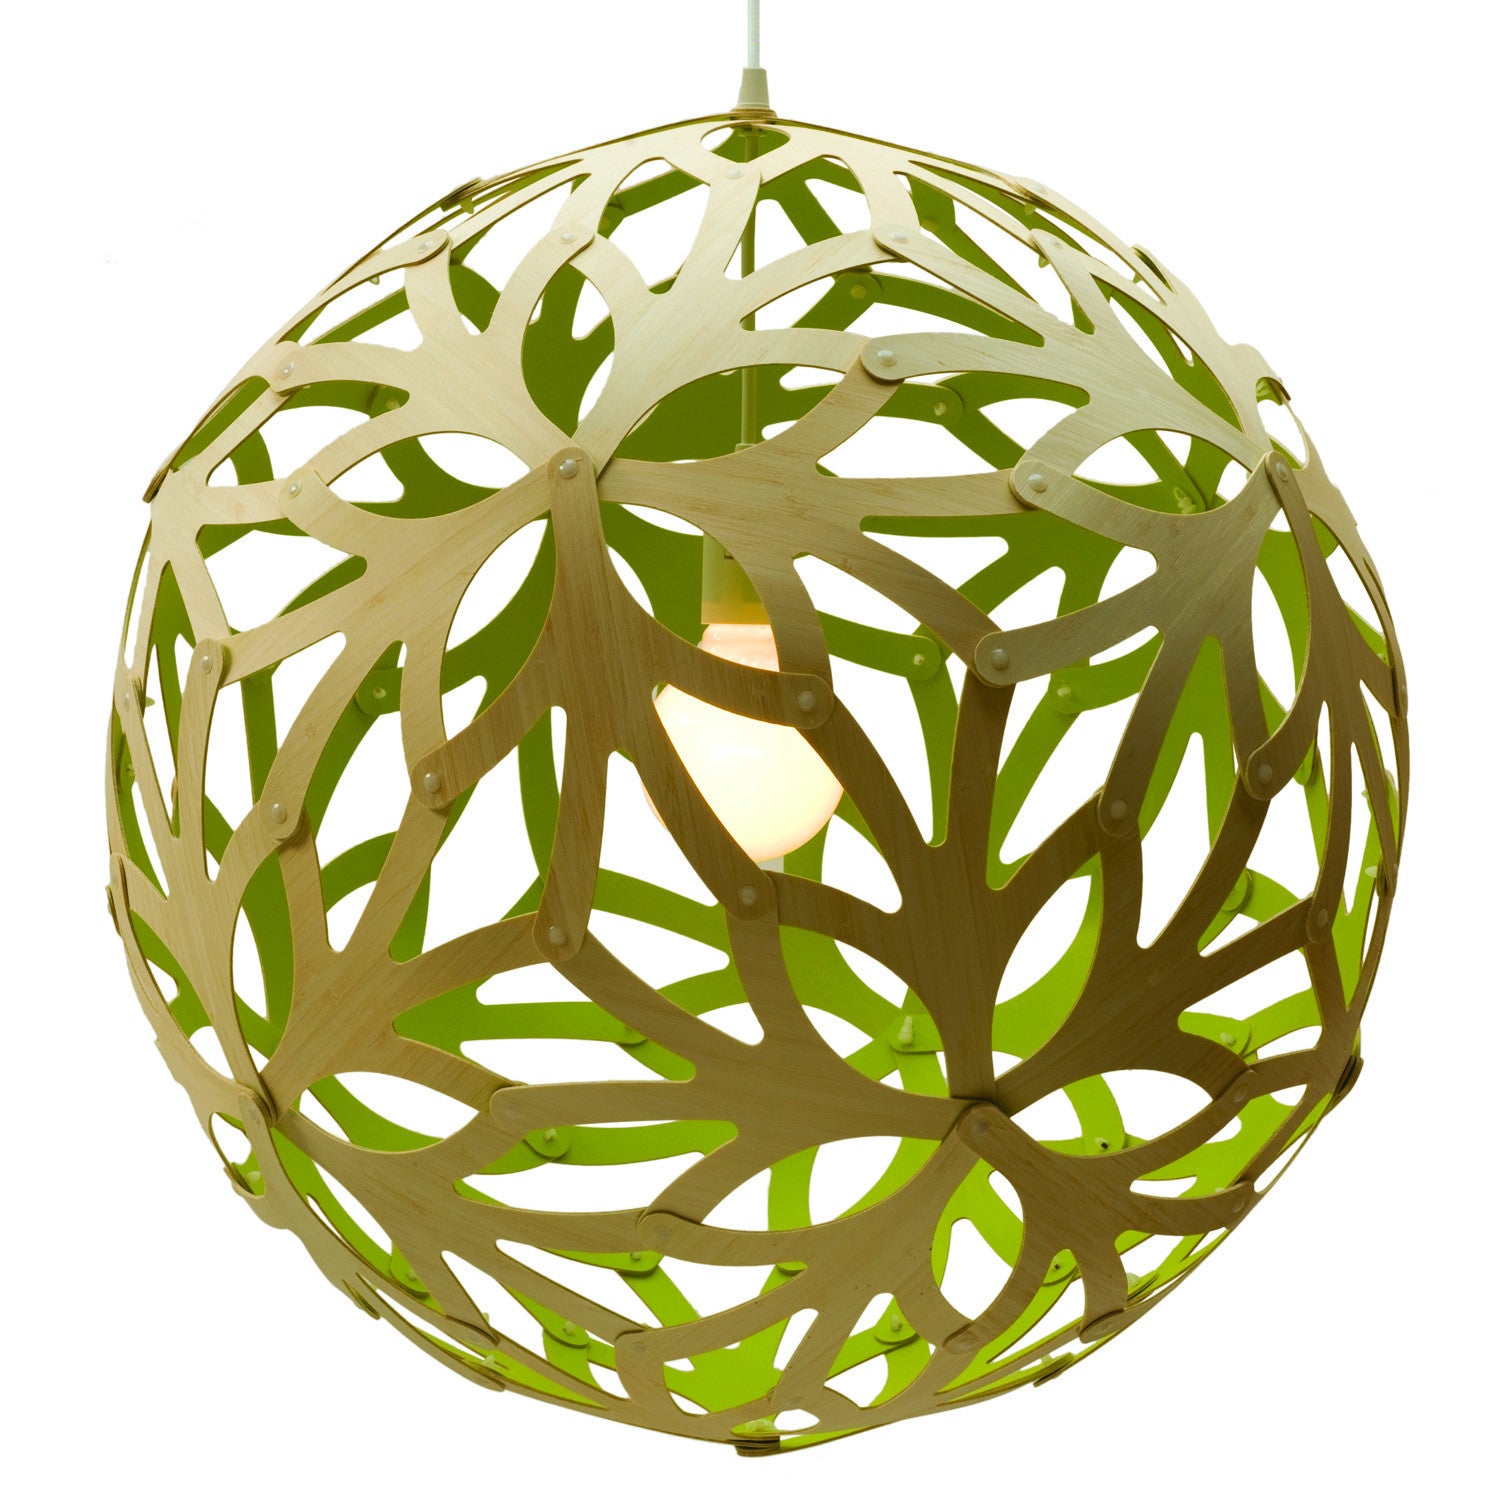 Floral light by David Trubridge in painted lime